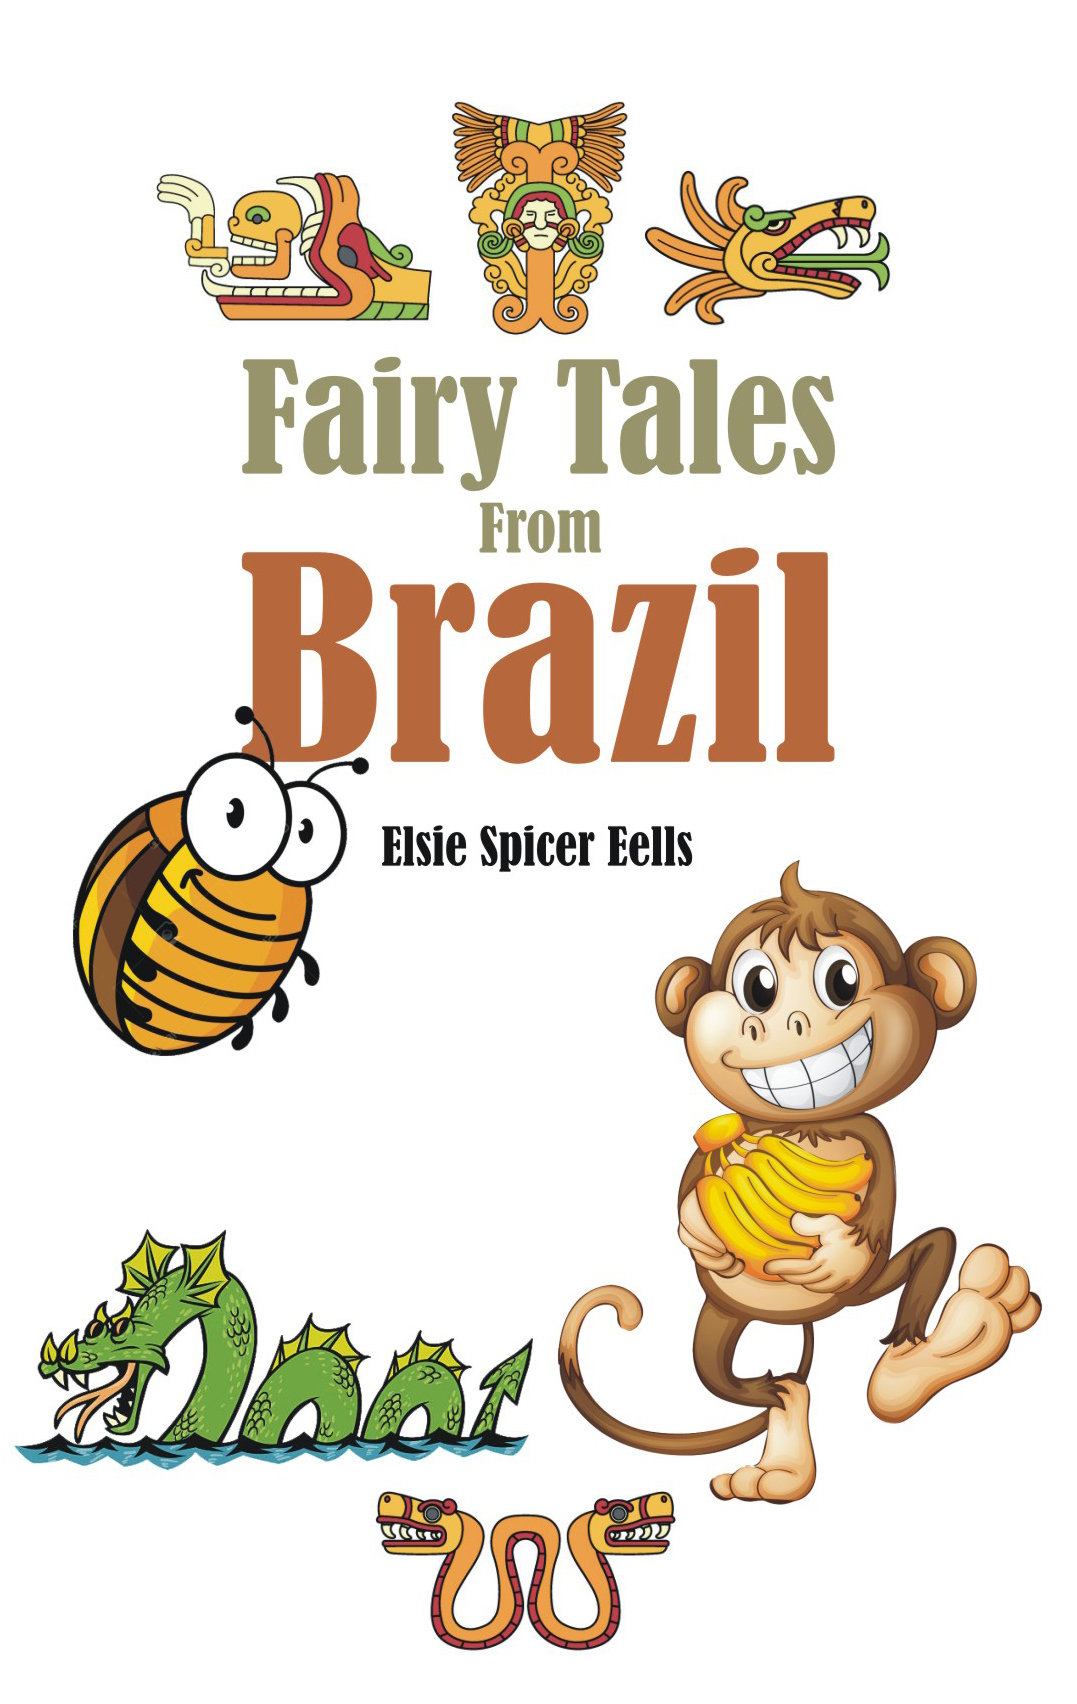 594. Fairy Tales from Brazil -Elsie Spicer Eells